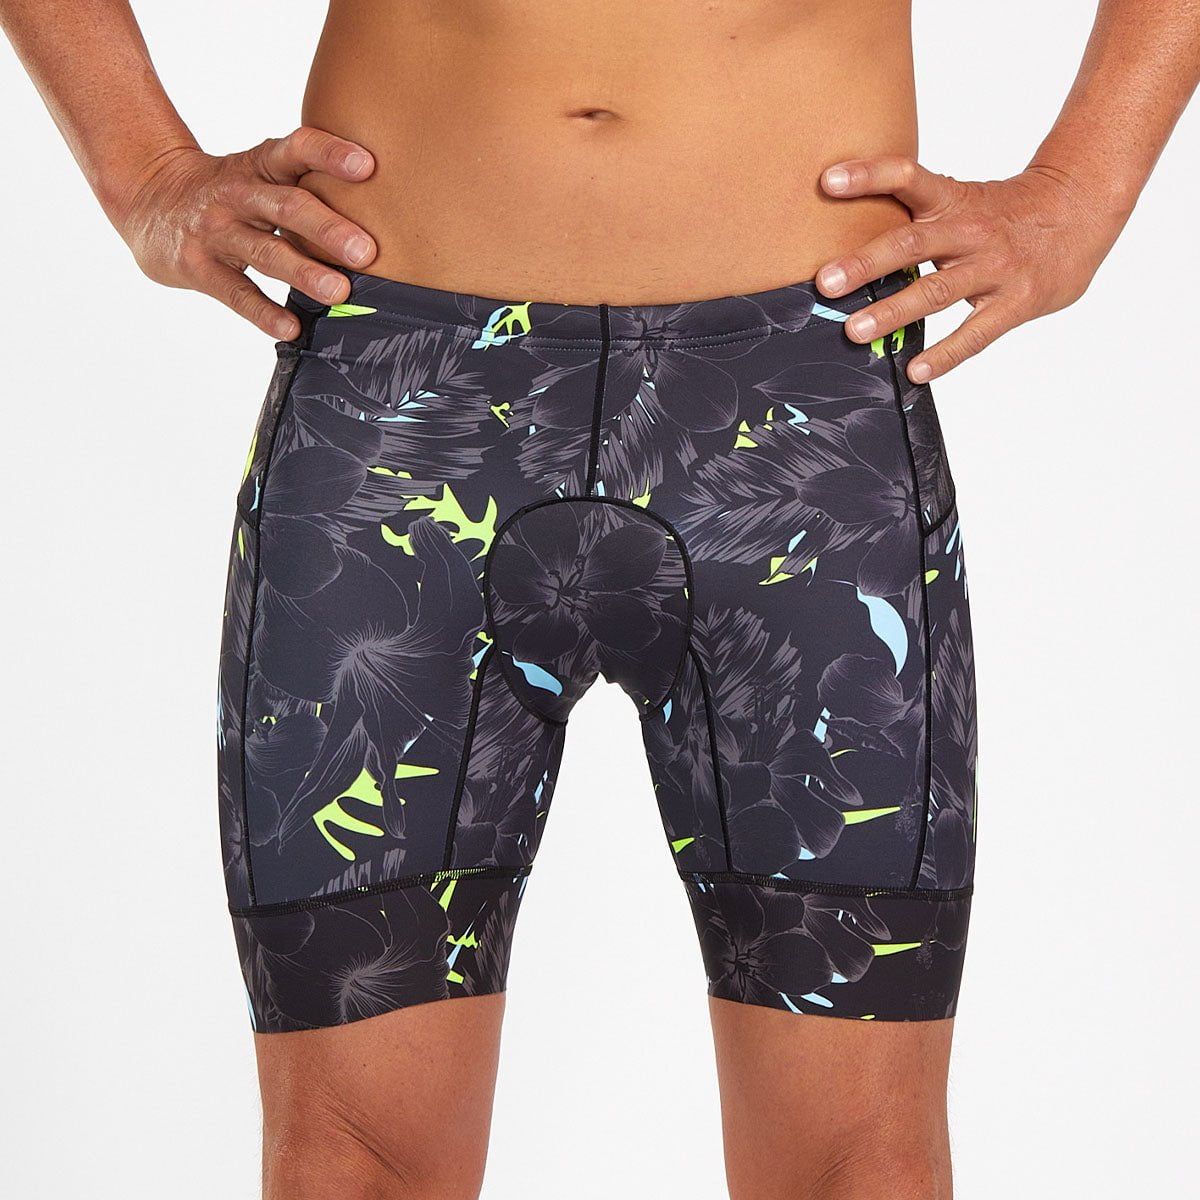 SPORTBR Chile - Short Running Zoot Live Aloha Hombre